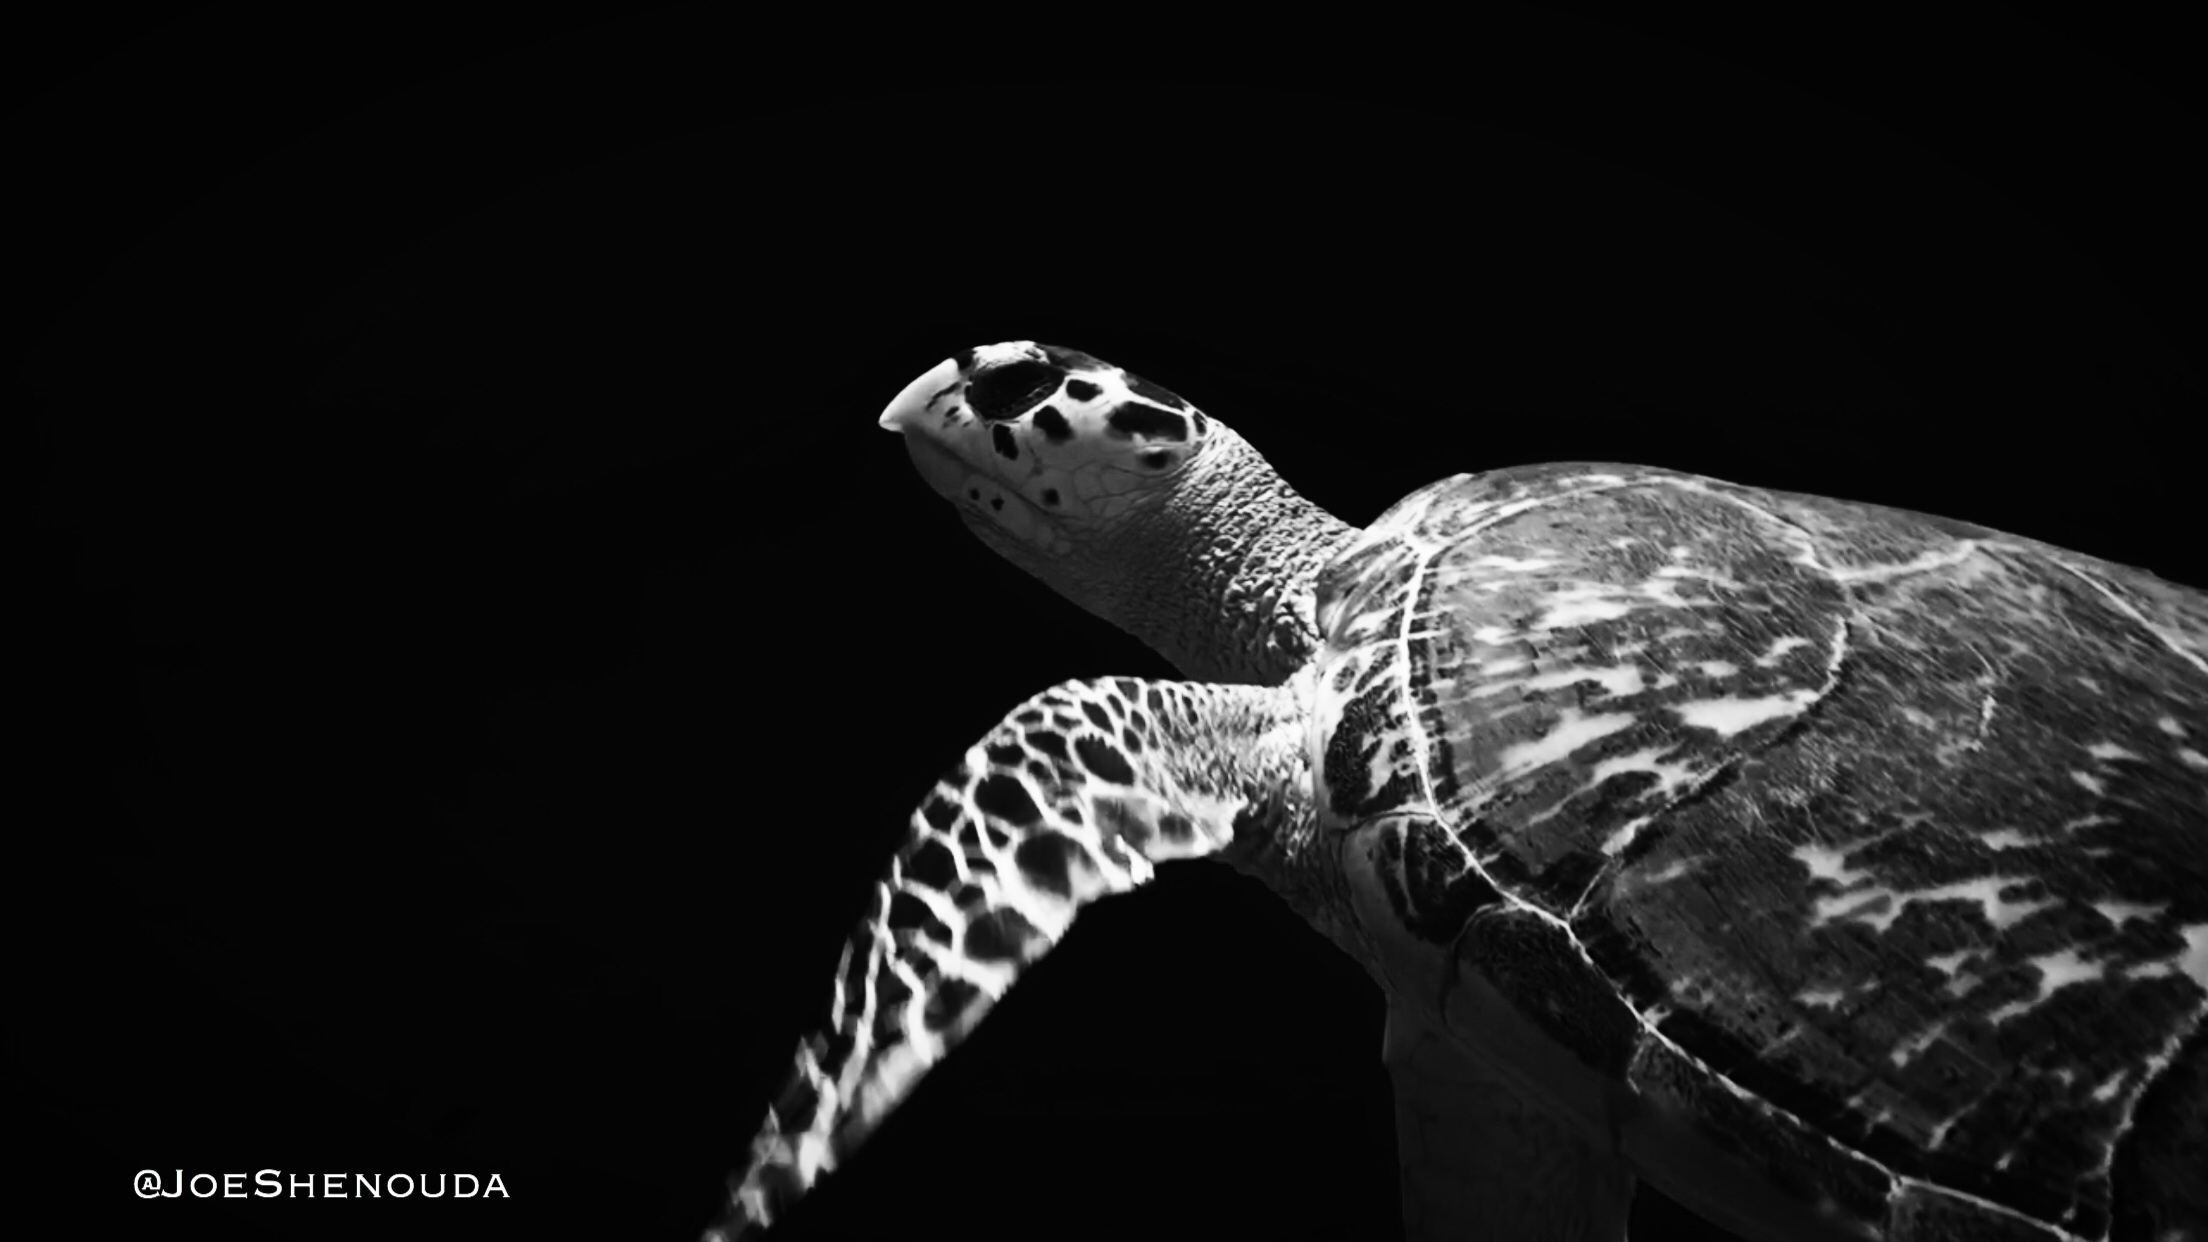 Did you know that the Hawksbill Sea Turtle is the most endangered type of turtle?